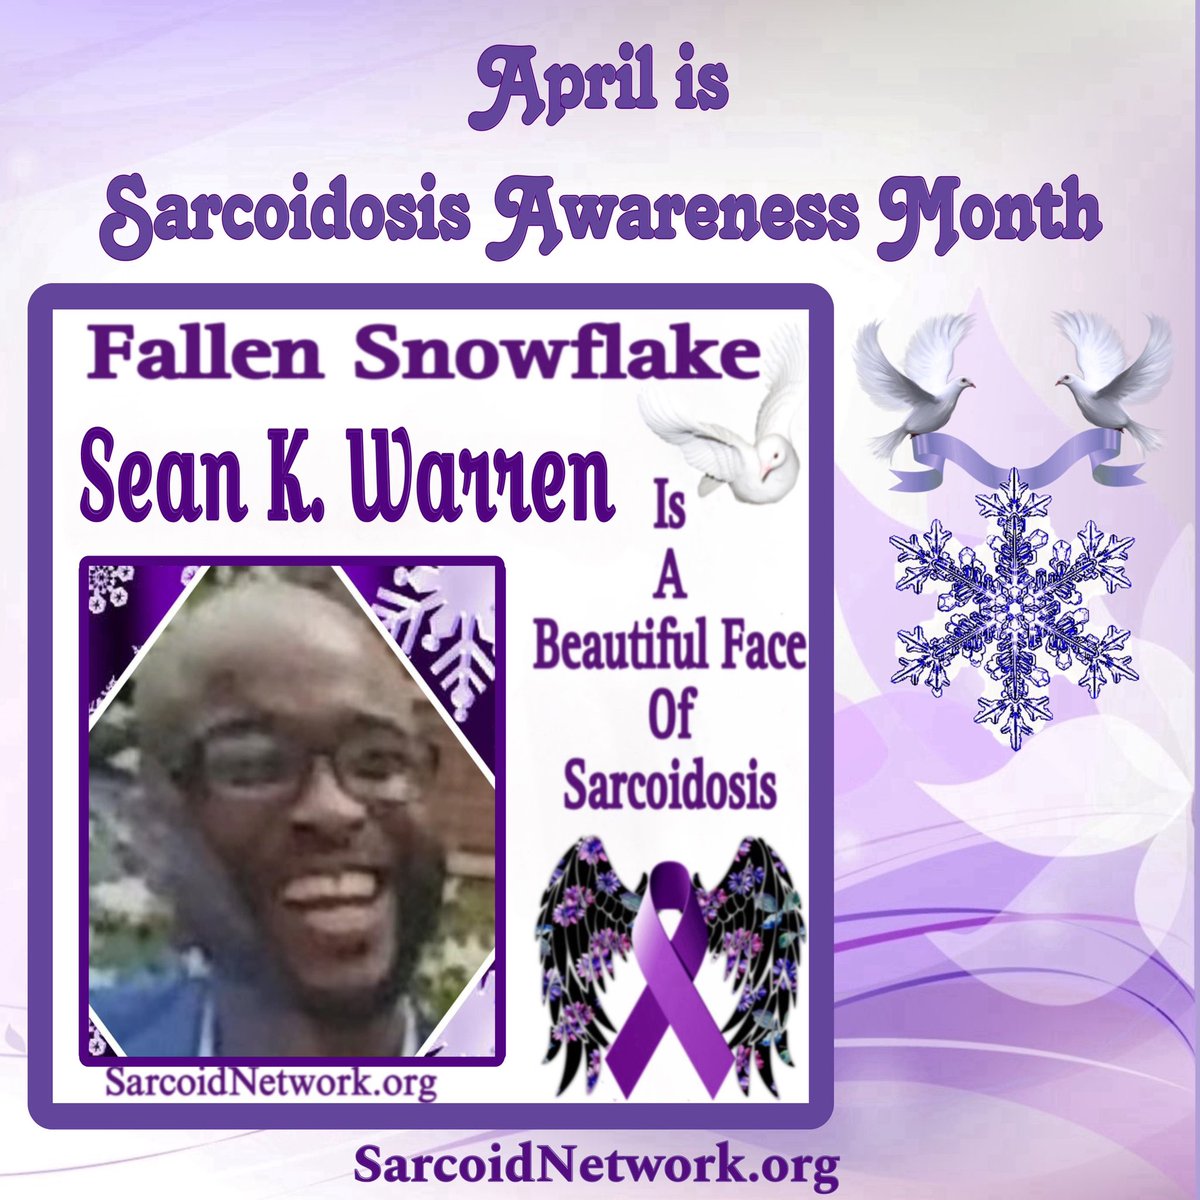 This is our Sarcoidosis Brother Fallen Snowflake Sean K. Warren and he is a Beautiful Face of Sarcoidosis.💜 #Sarcoidosis #raredisease #preciousmemories #patientadvocate #sarcoidosisadvocate #beautifulfacesofsarcoidosis #sarcoidosisawarenessmonth